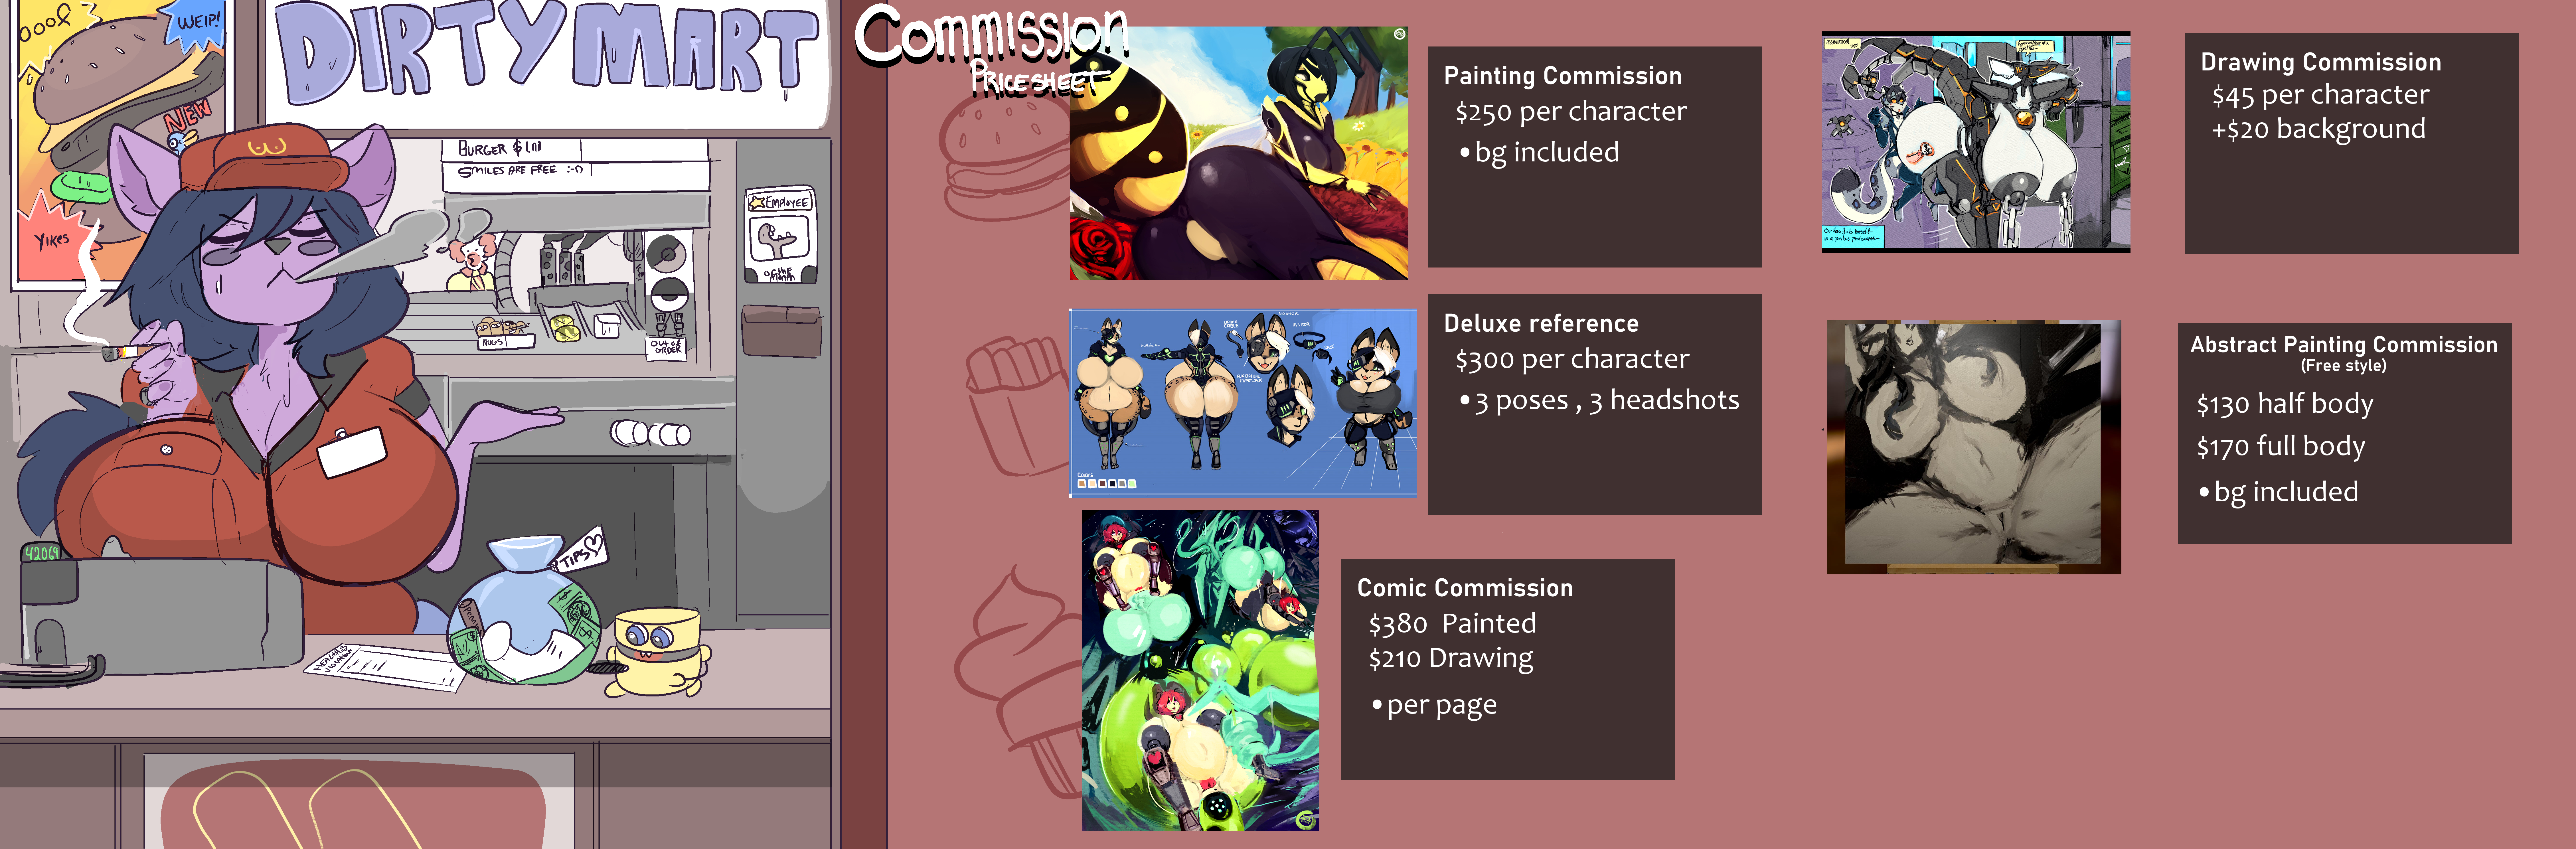 Commission info page